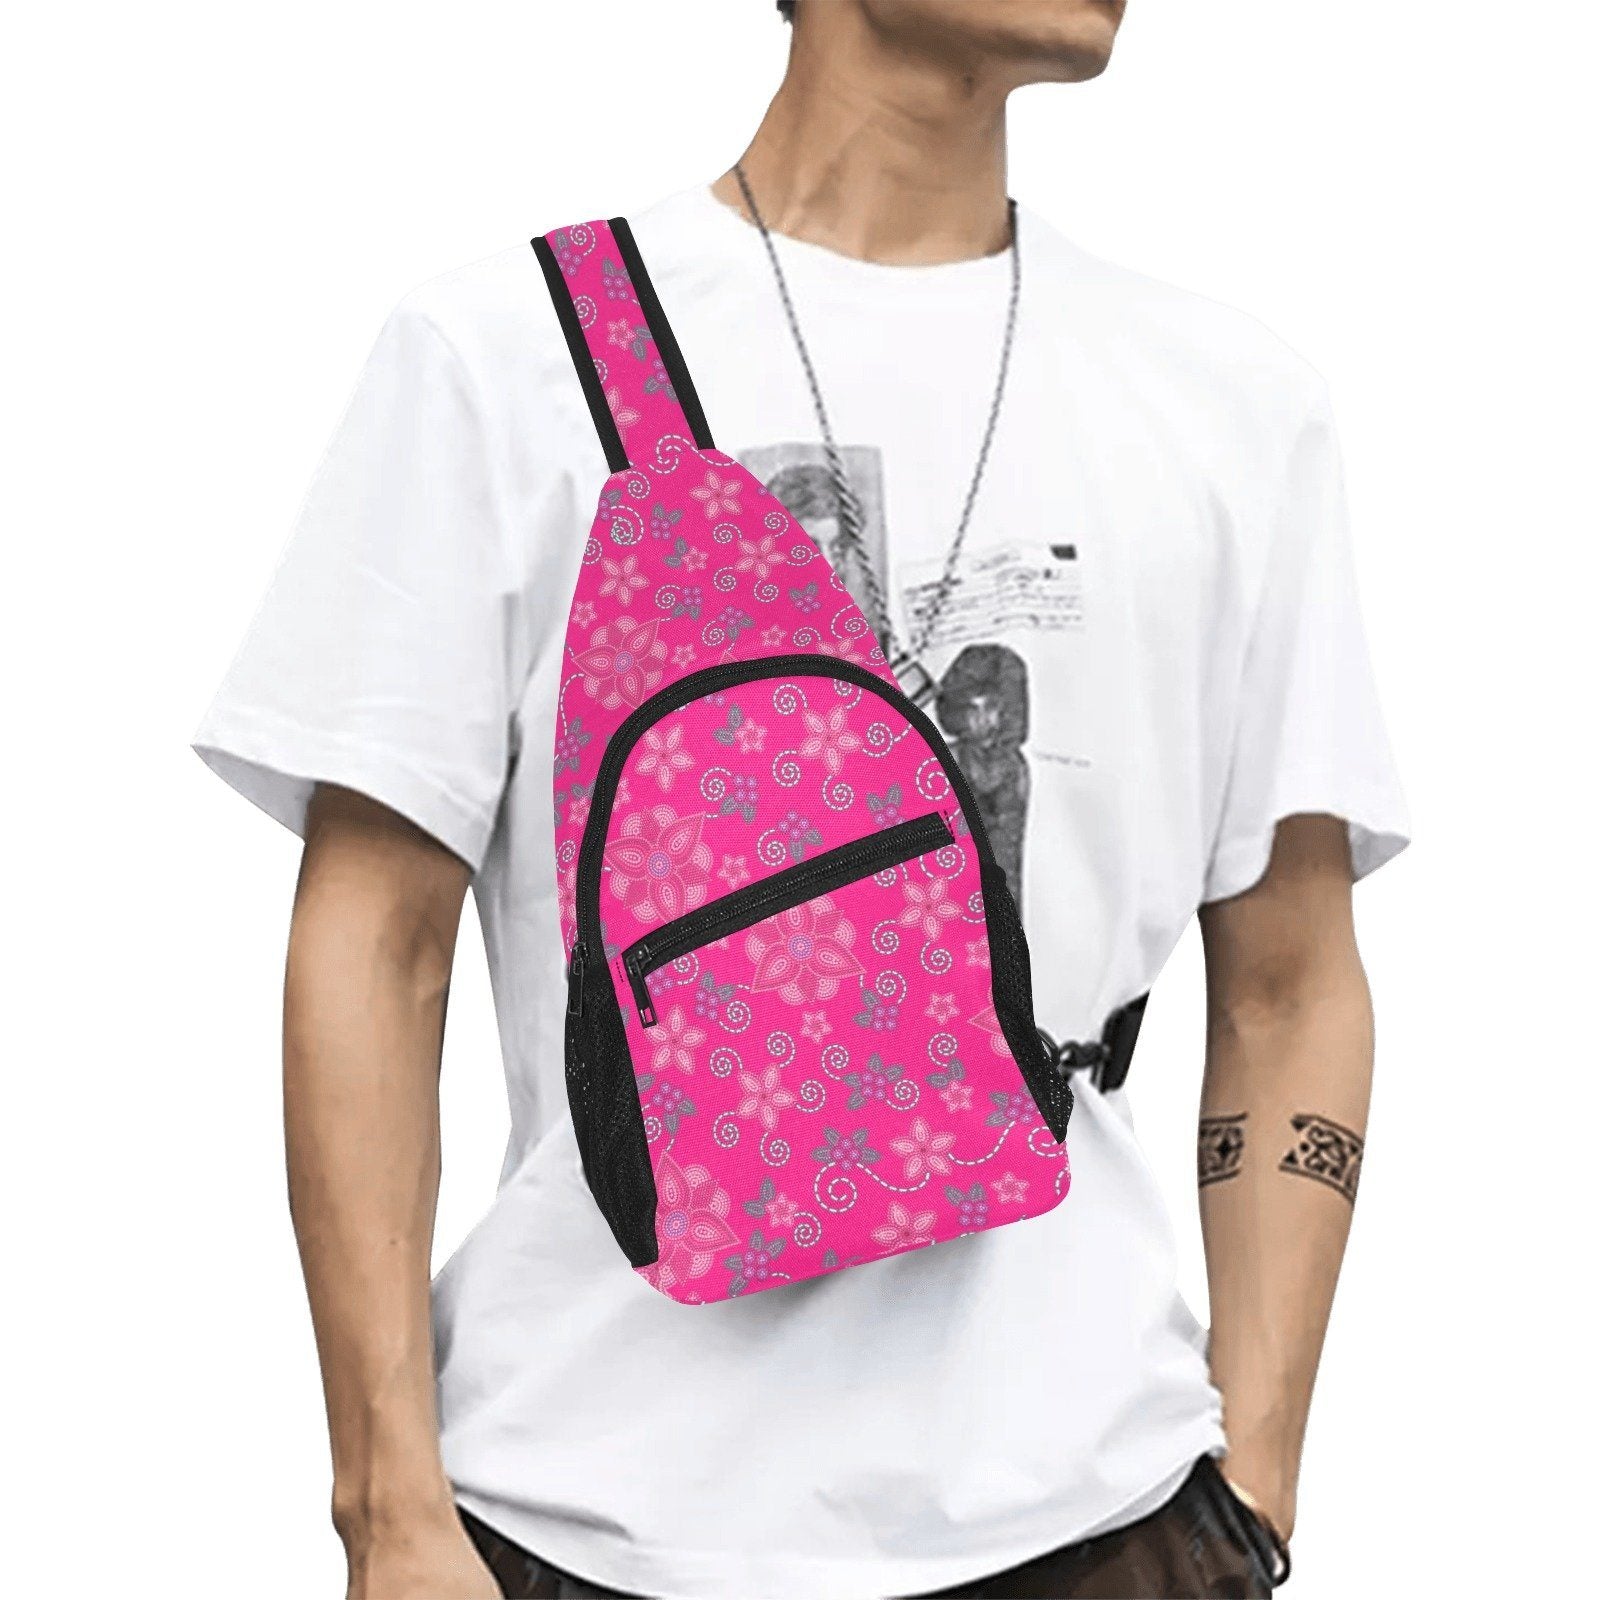 Berry Picking Pink All Over Print Chest Bag (Model 1719) All Over Print Chest Bag (1719) e-joyer 